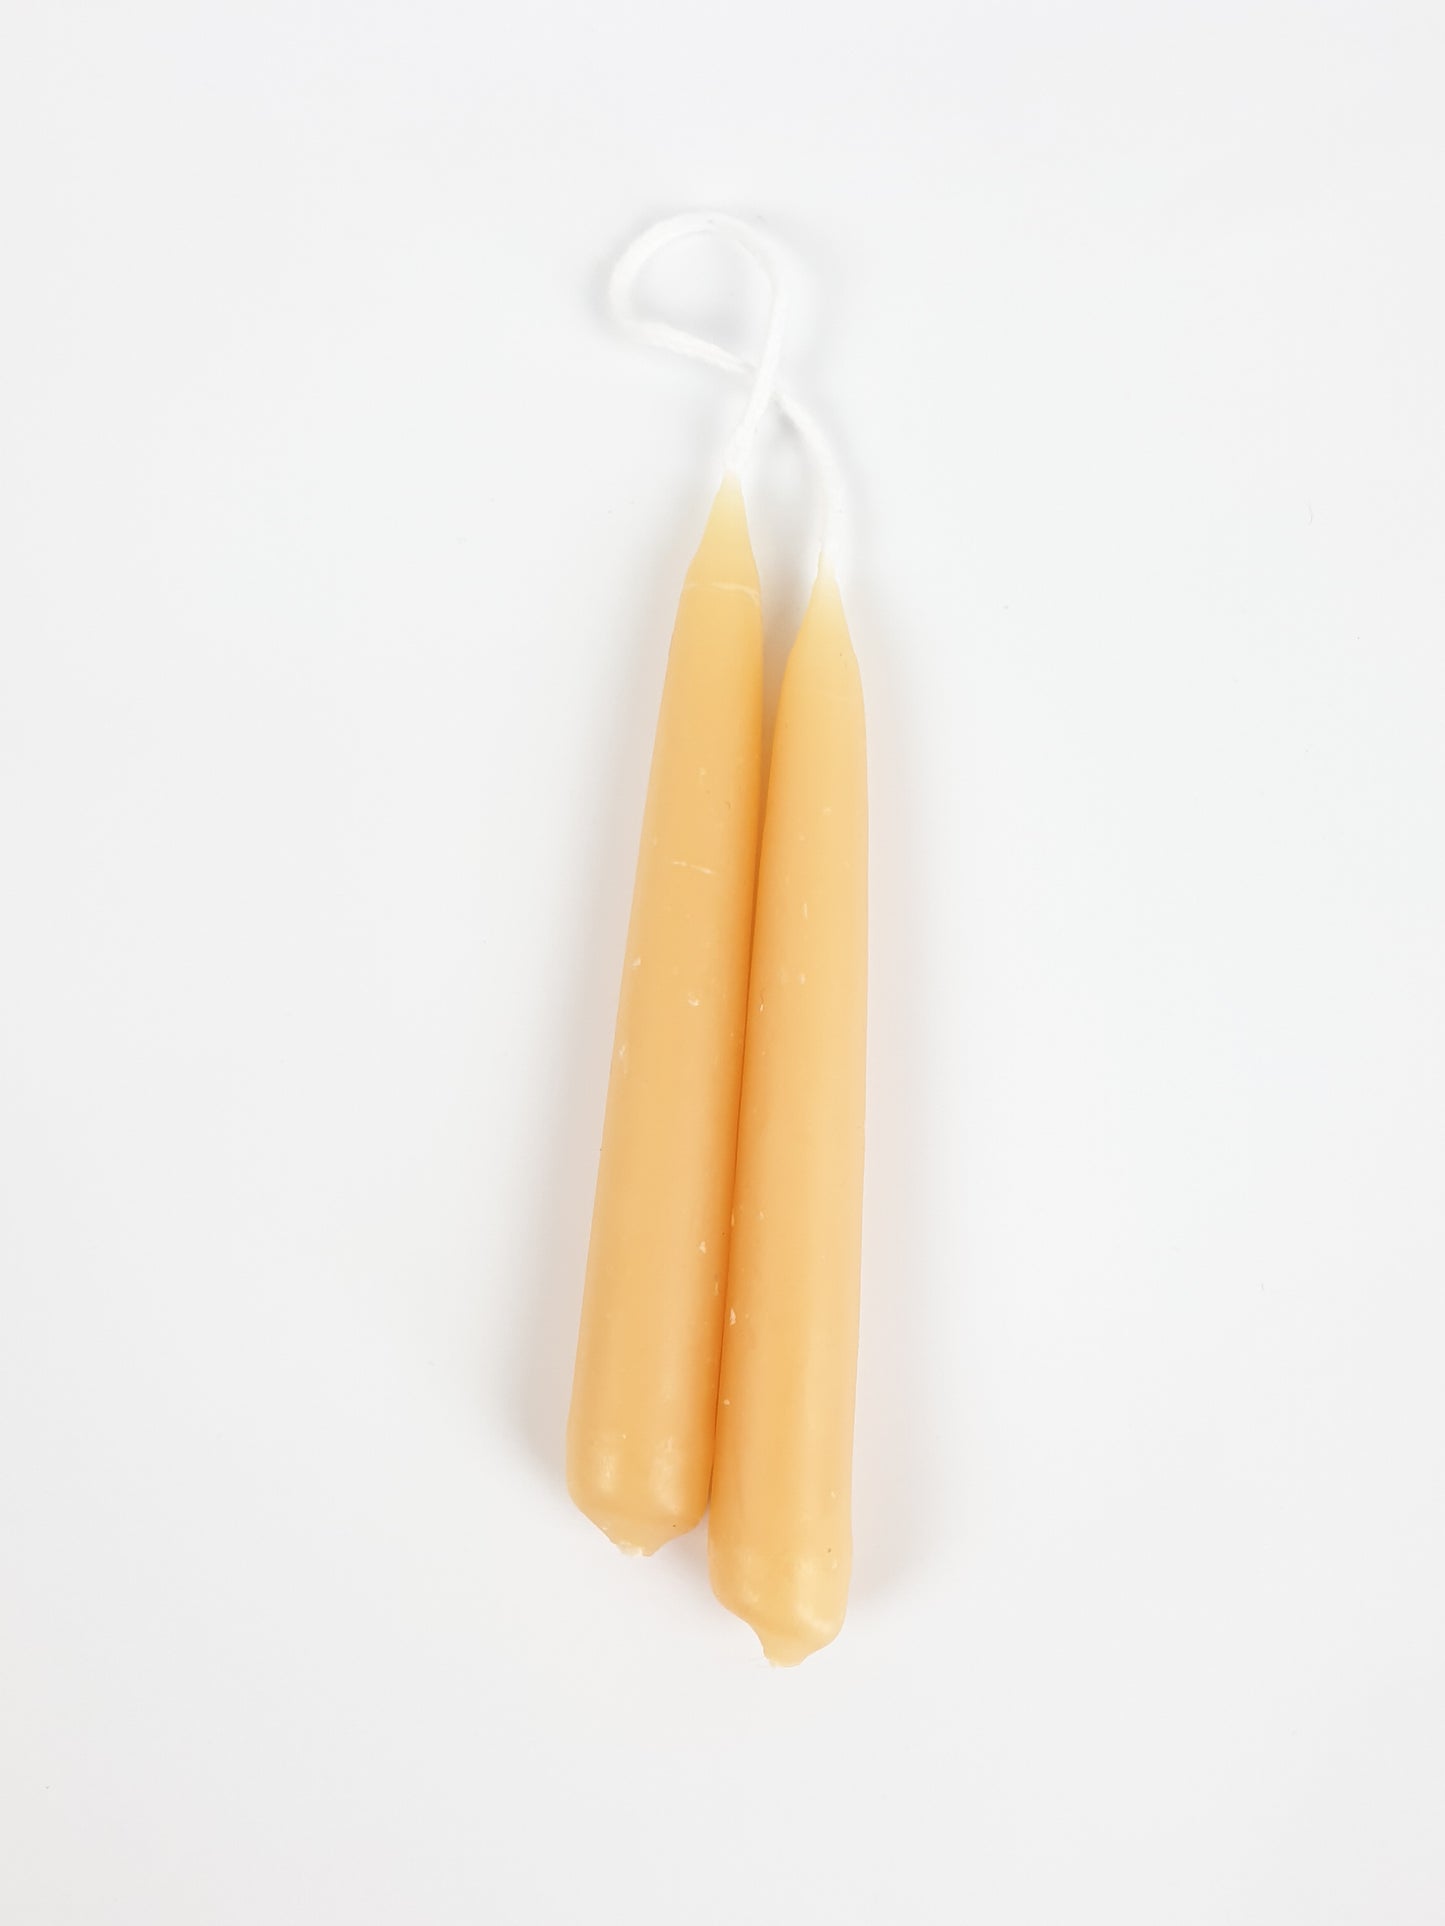 Tree/ Chime English Beeswax Candles